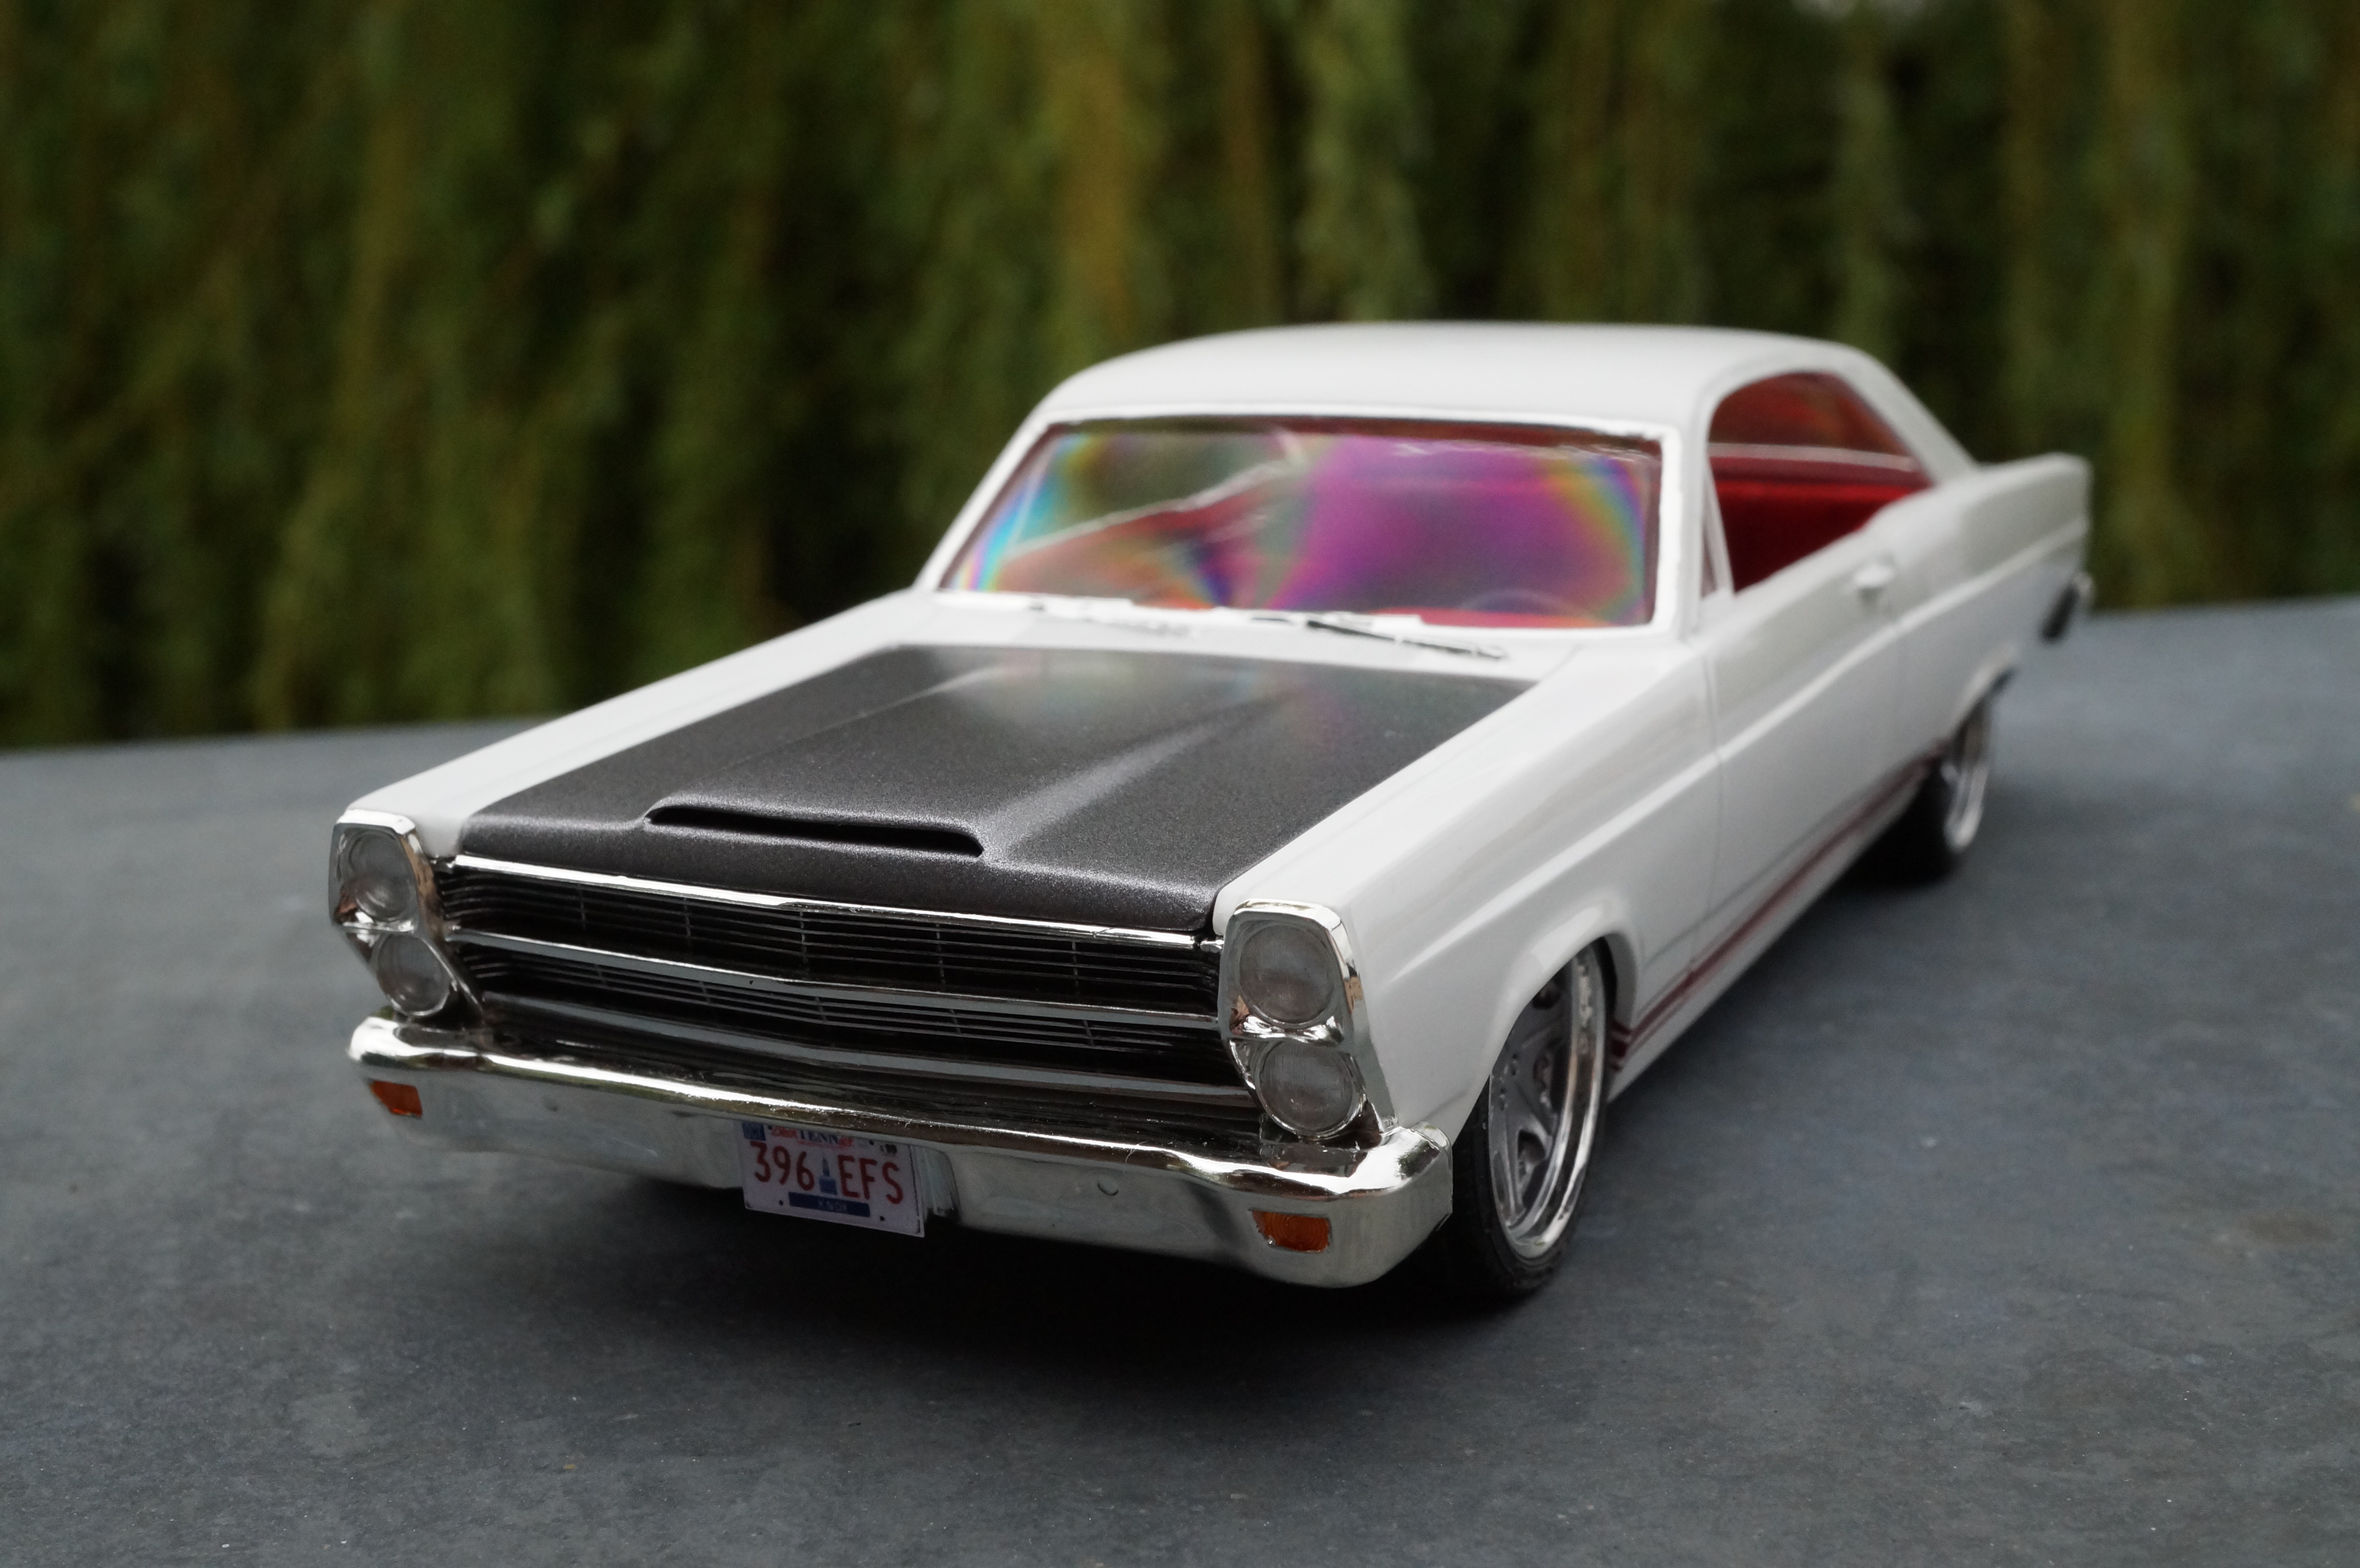 66 Ford Fairlane 427 pro touring , terminée !!! - Page 2 1505020220198898213227394